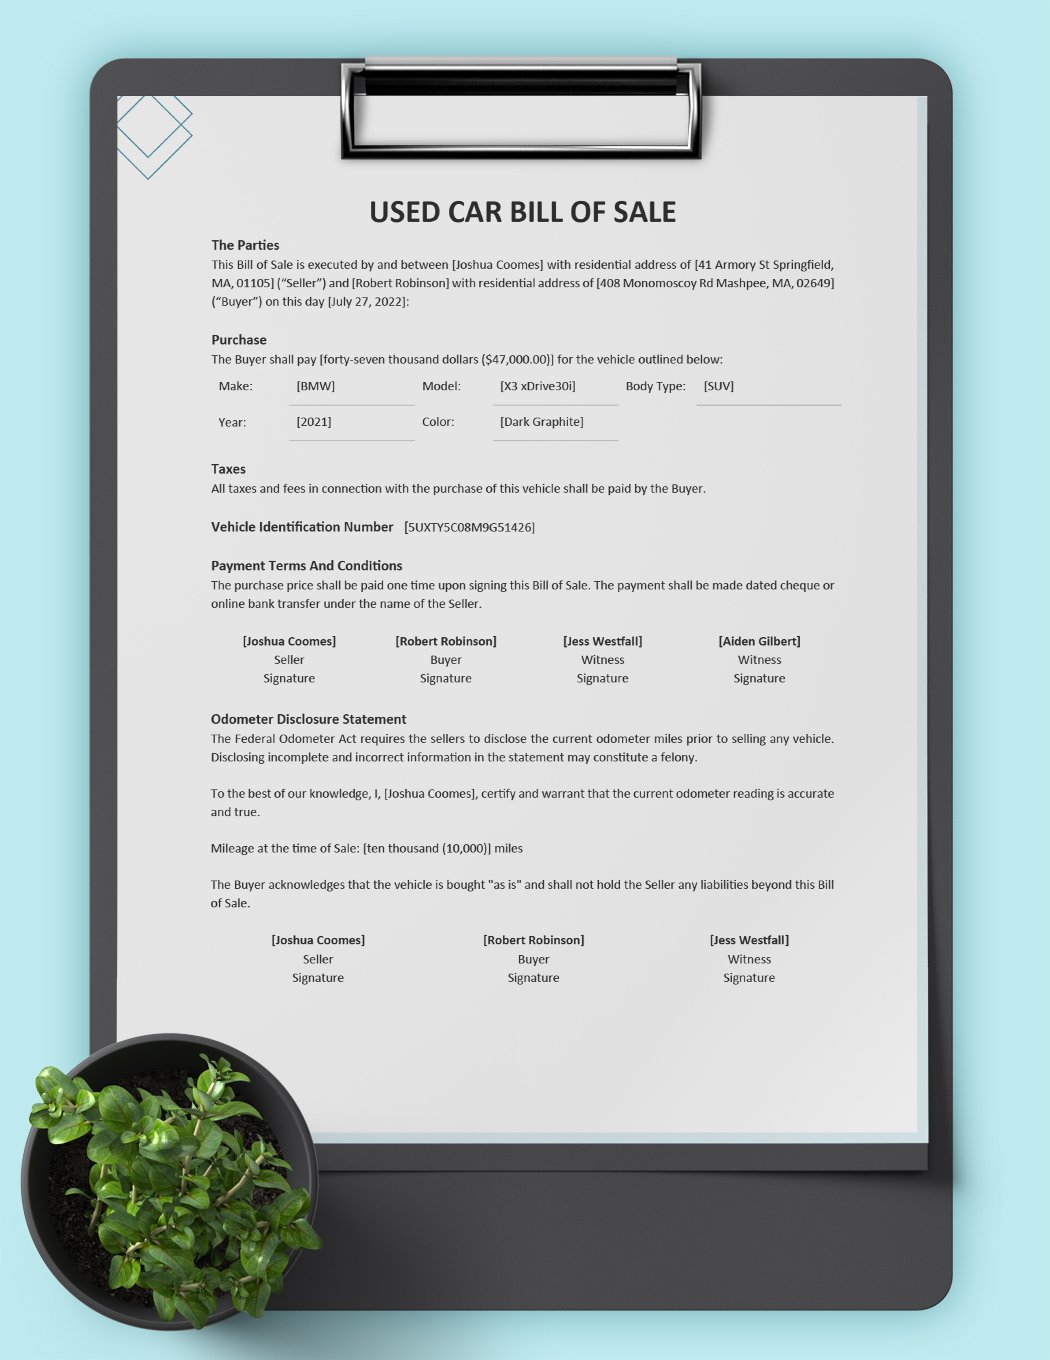 Used Car Bill of Sale Template